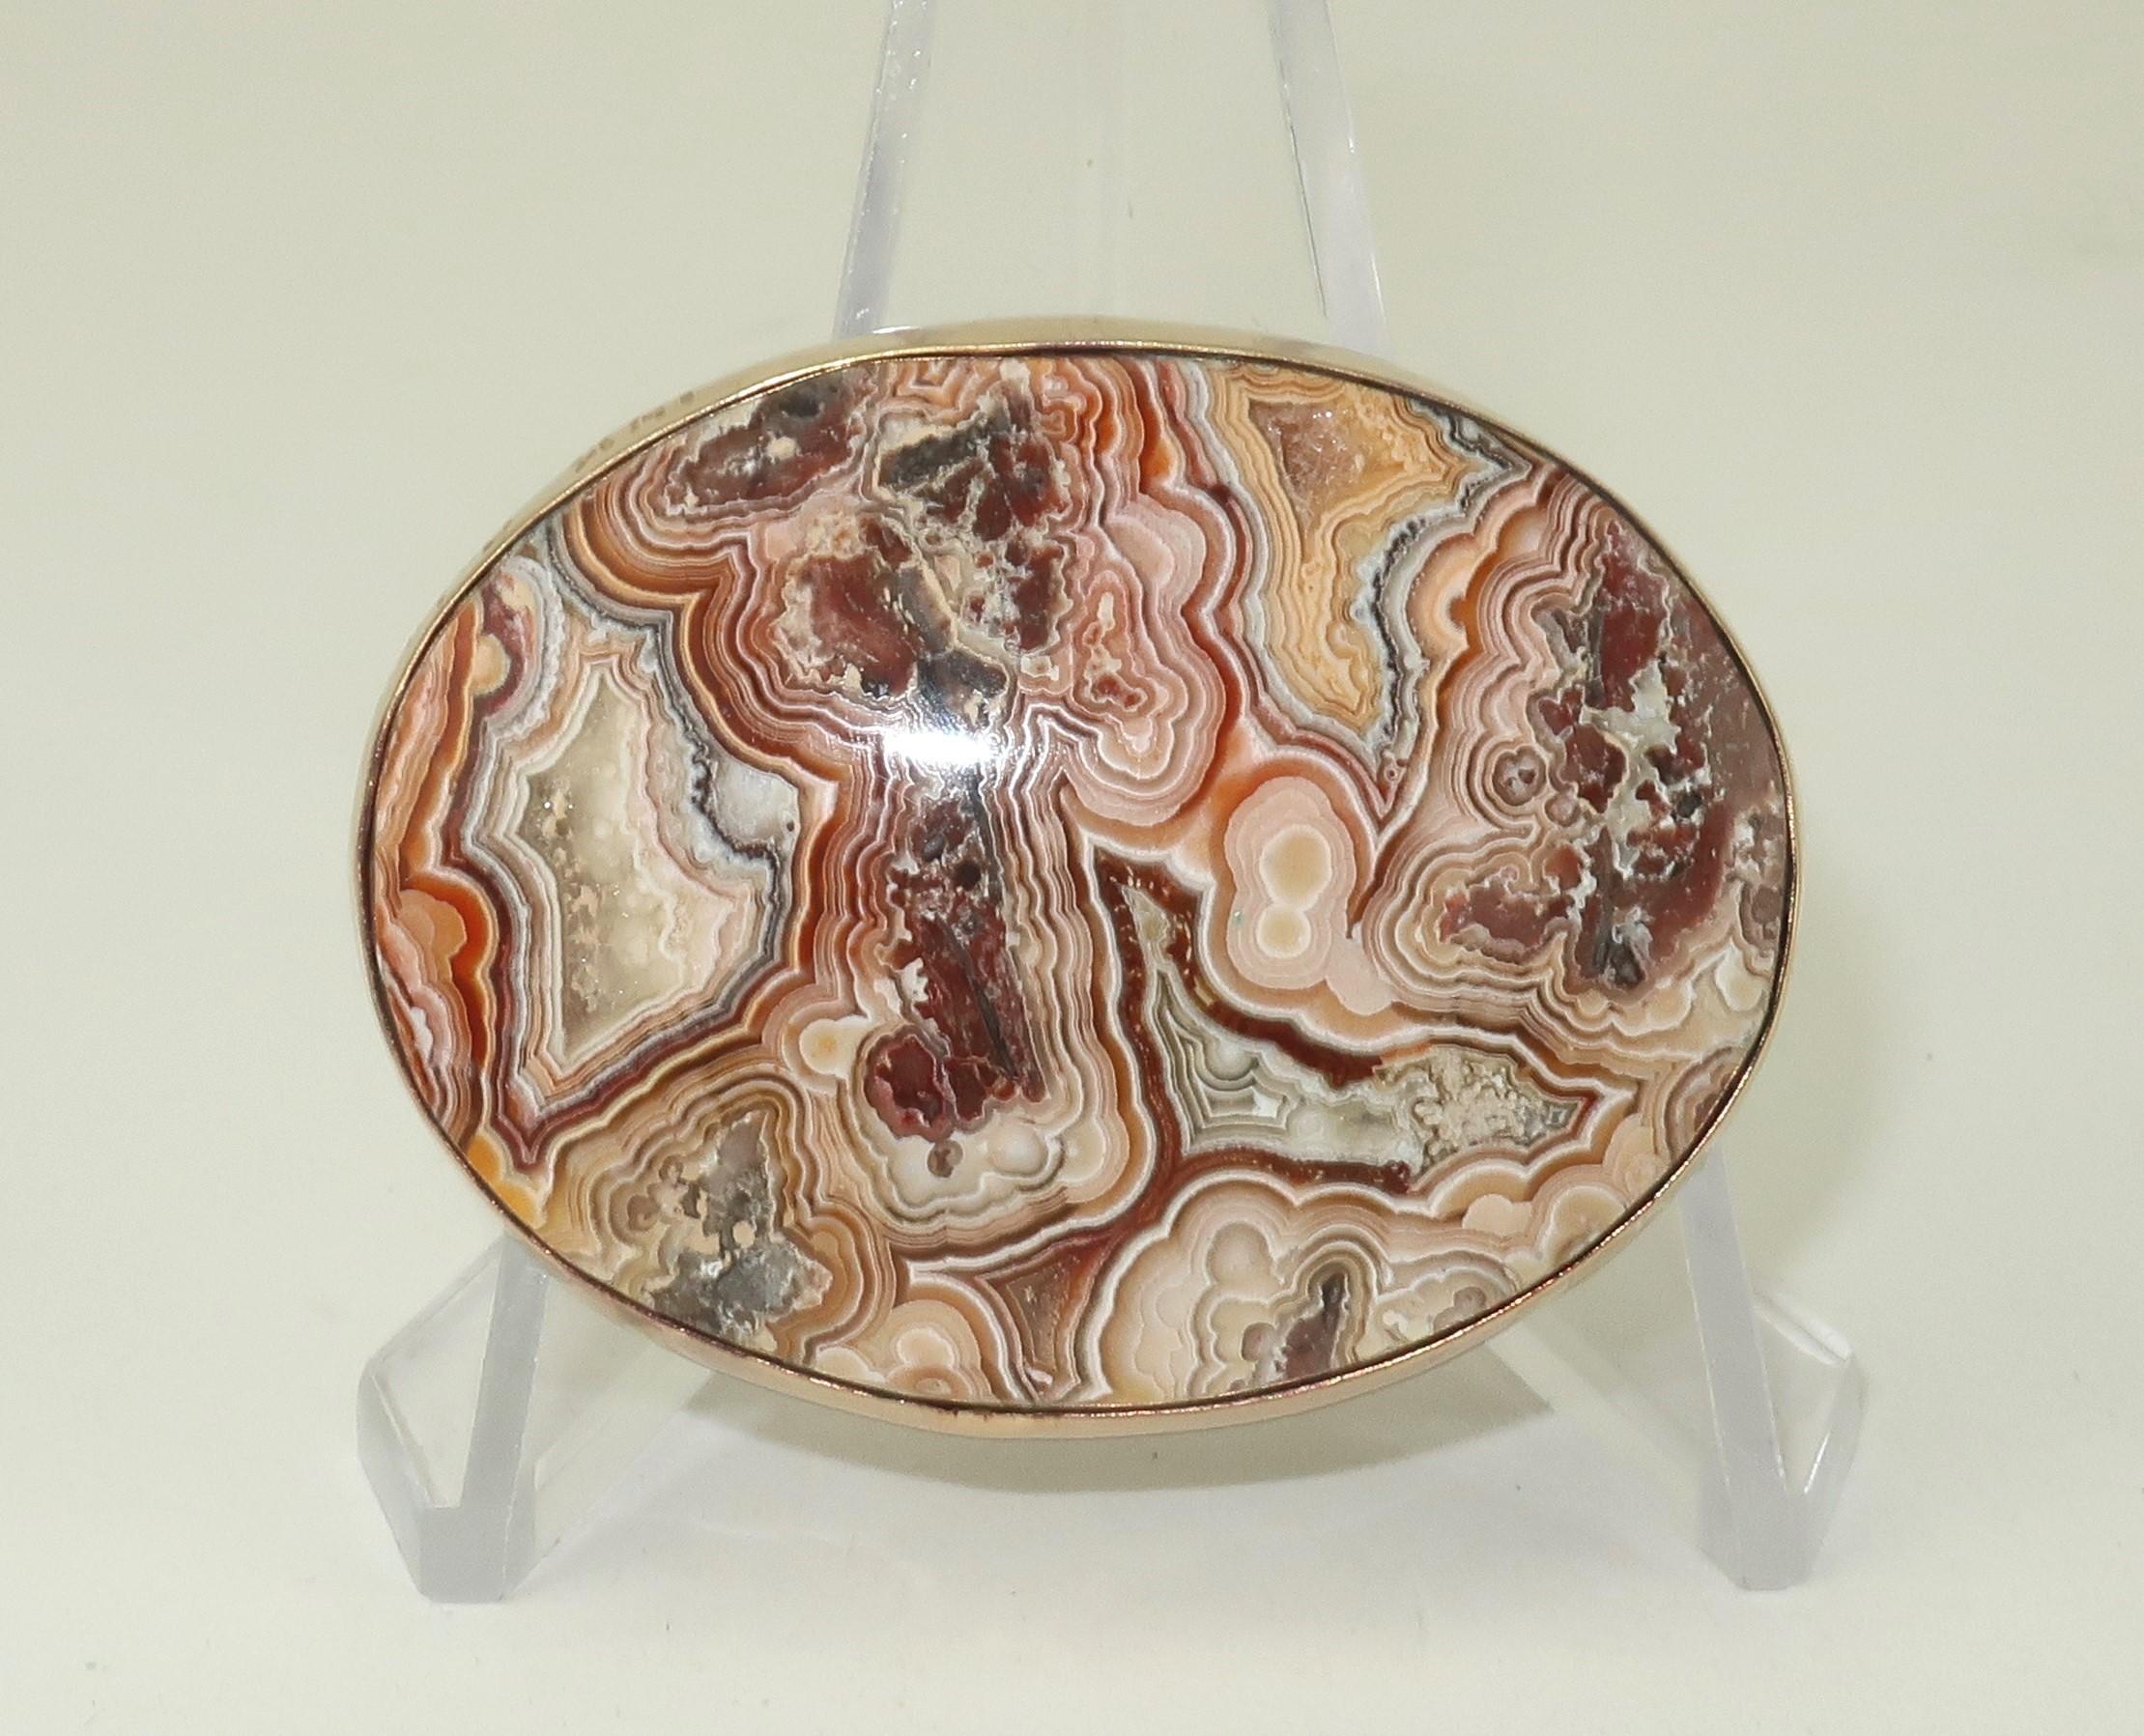 A gorgeous oval shaped polished agate framed in a 14K gold setting outfitted with straight pin hardware.  The agate is in earth tone shades of brown and amber orange.  The intricate pattern of nature’s design is known as ‘crazy lace’.  The 14K gold